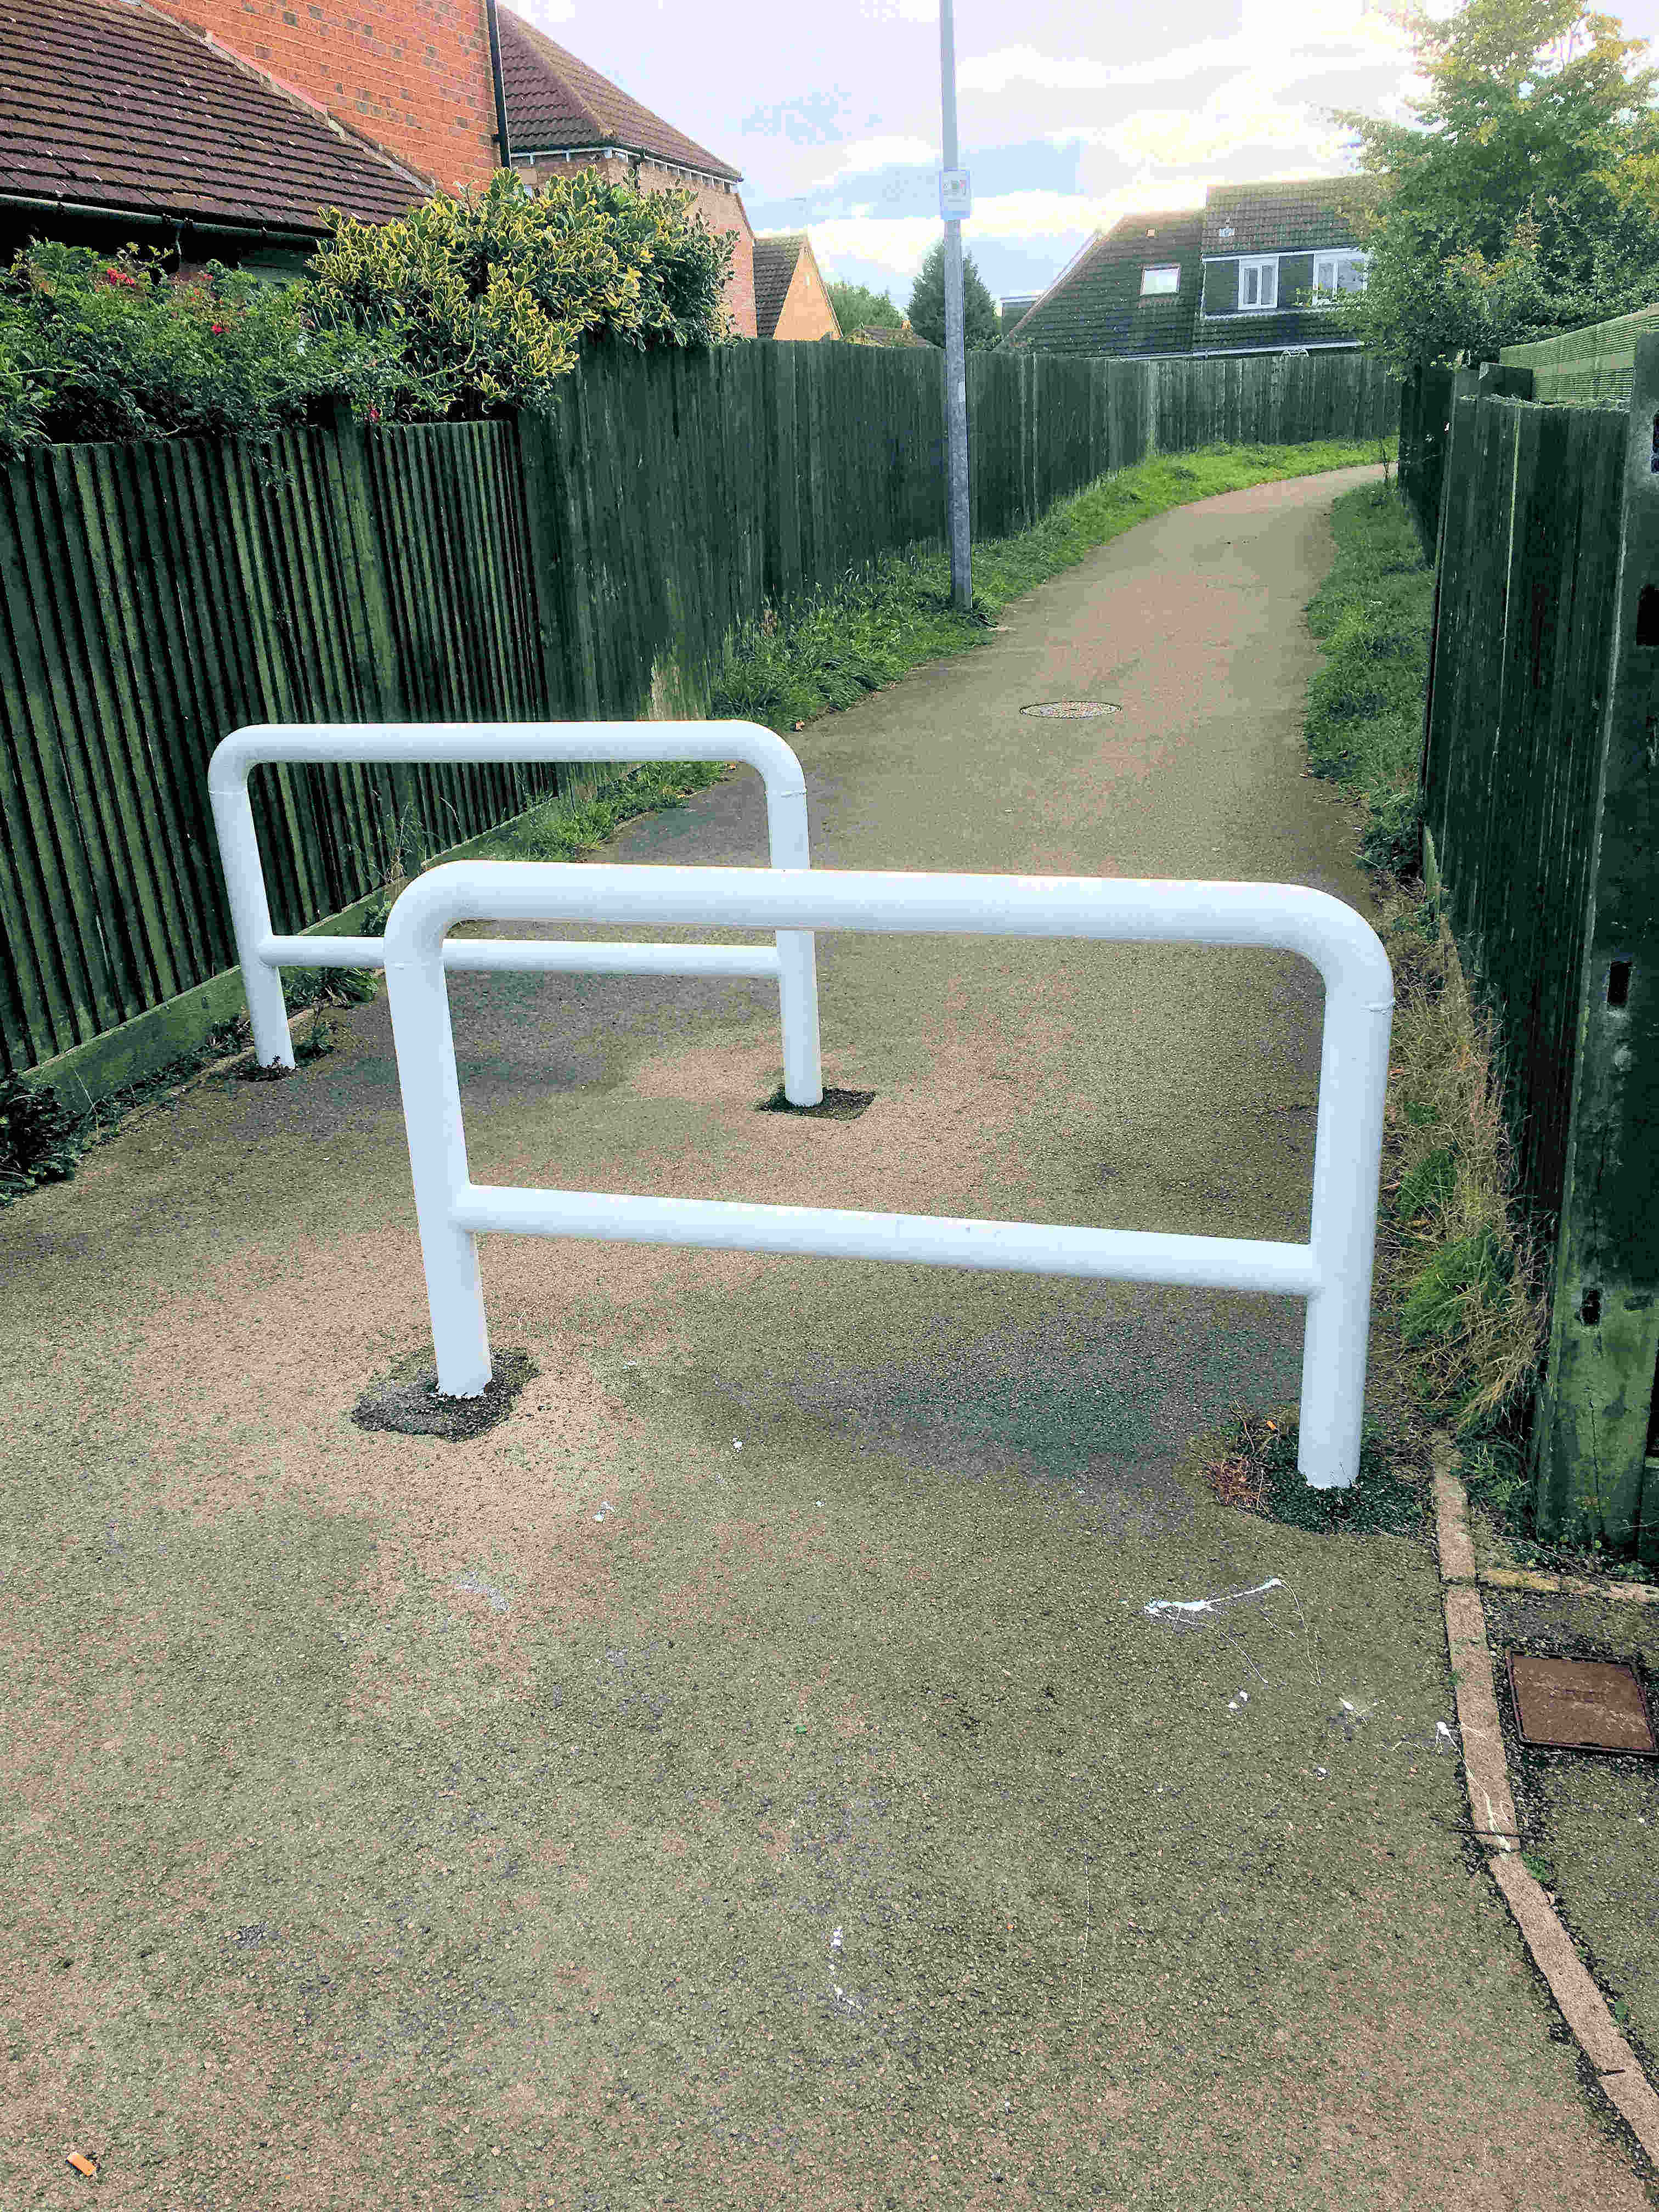 Good news as Community Payback teams have got round to painting some of the cycle barriers in the area. This one is in Teal Drrive